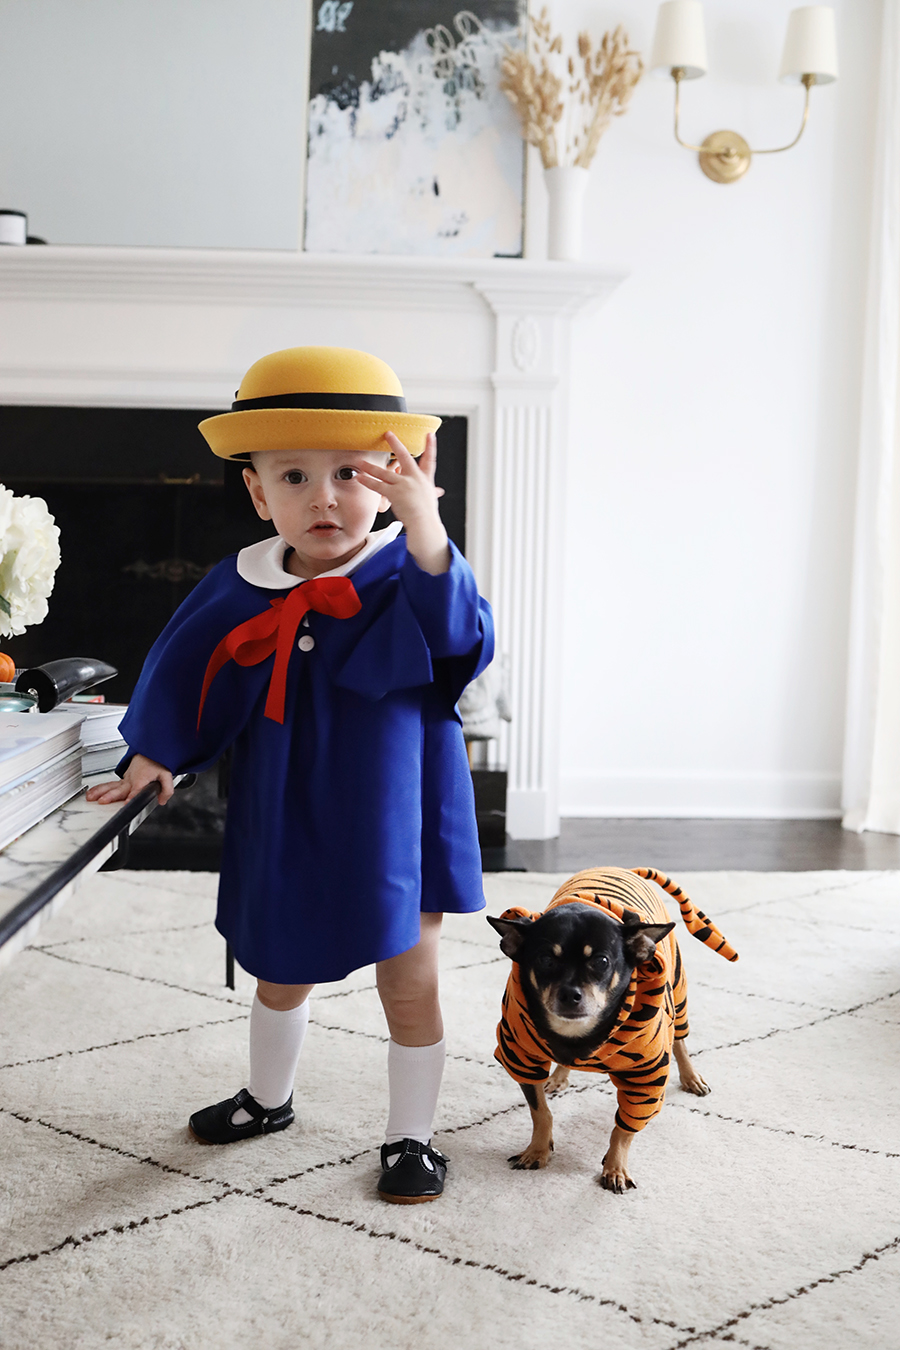 Woman Crochets Full Body Halloween Costumes For Her Kids (11 Pics